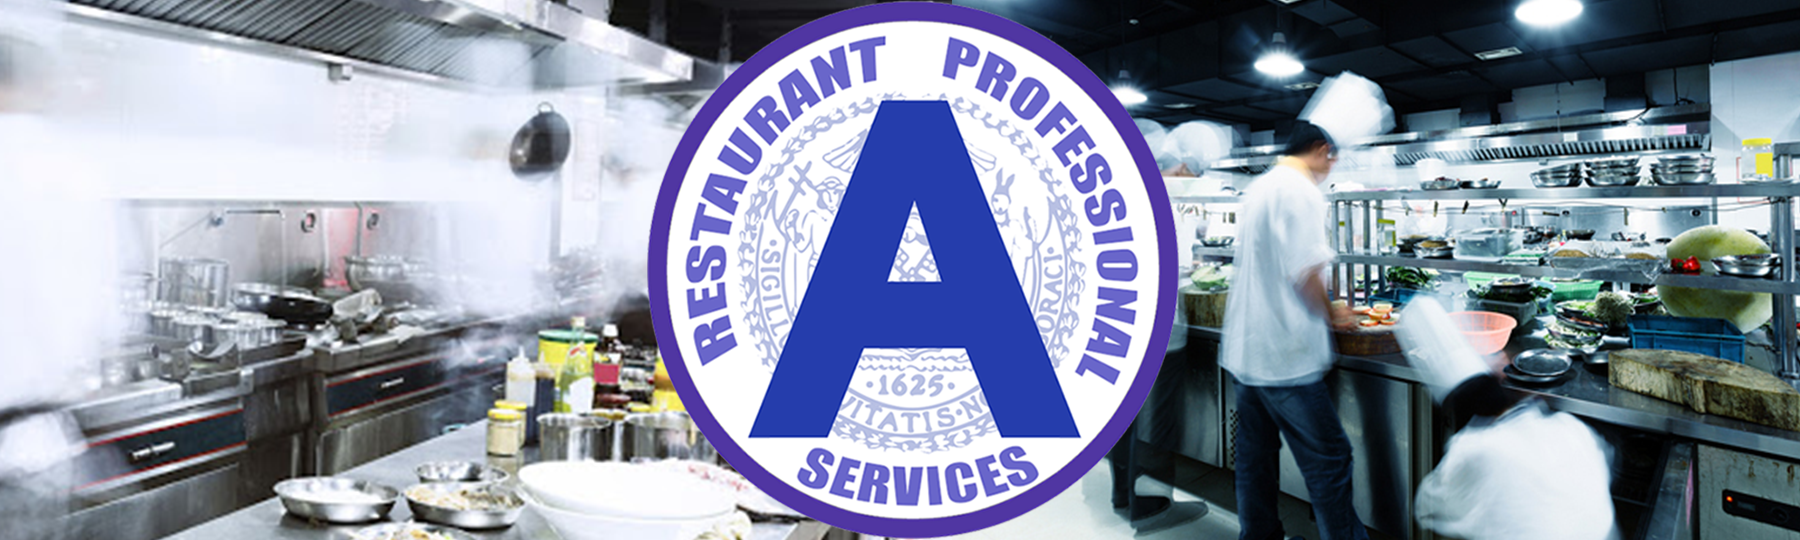 Restaurant Professional Services, LLC | Mock Health Department Inspections in the Manhattan (NYC), Queens, Brooklyn, Staten Island, Bronx, Long Island, Westchester, Connecticut, & New Jersey Area | PHONE: Mark Manganiello 516-557-5447, PHONE: Patrick Shoureas 516-946-6747 or email RestaurantProfessionalServices@gmail.com - Photo